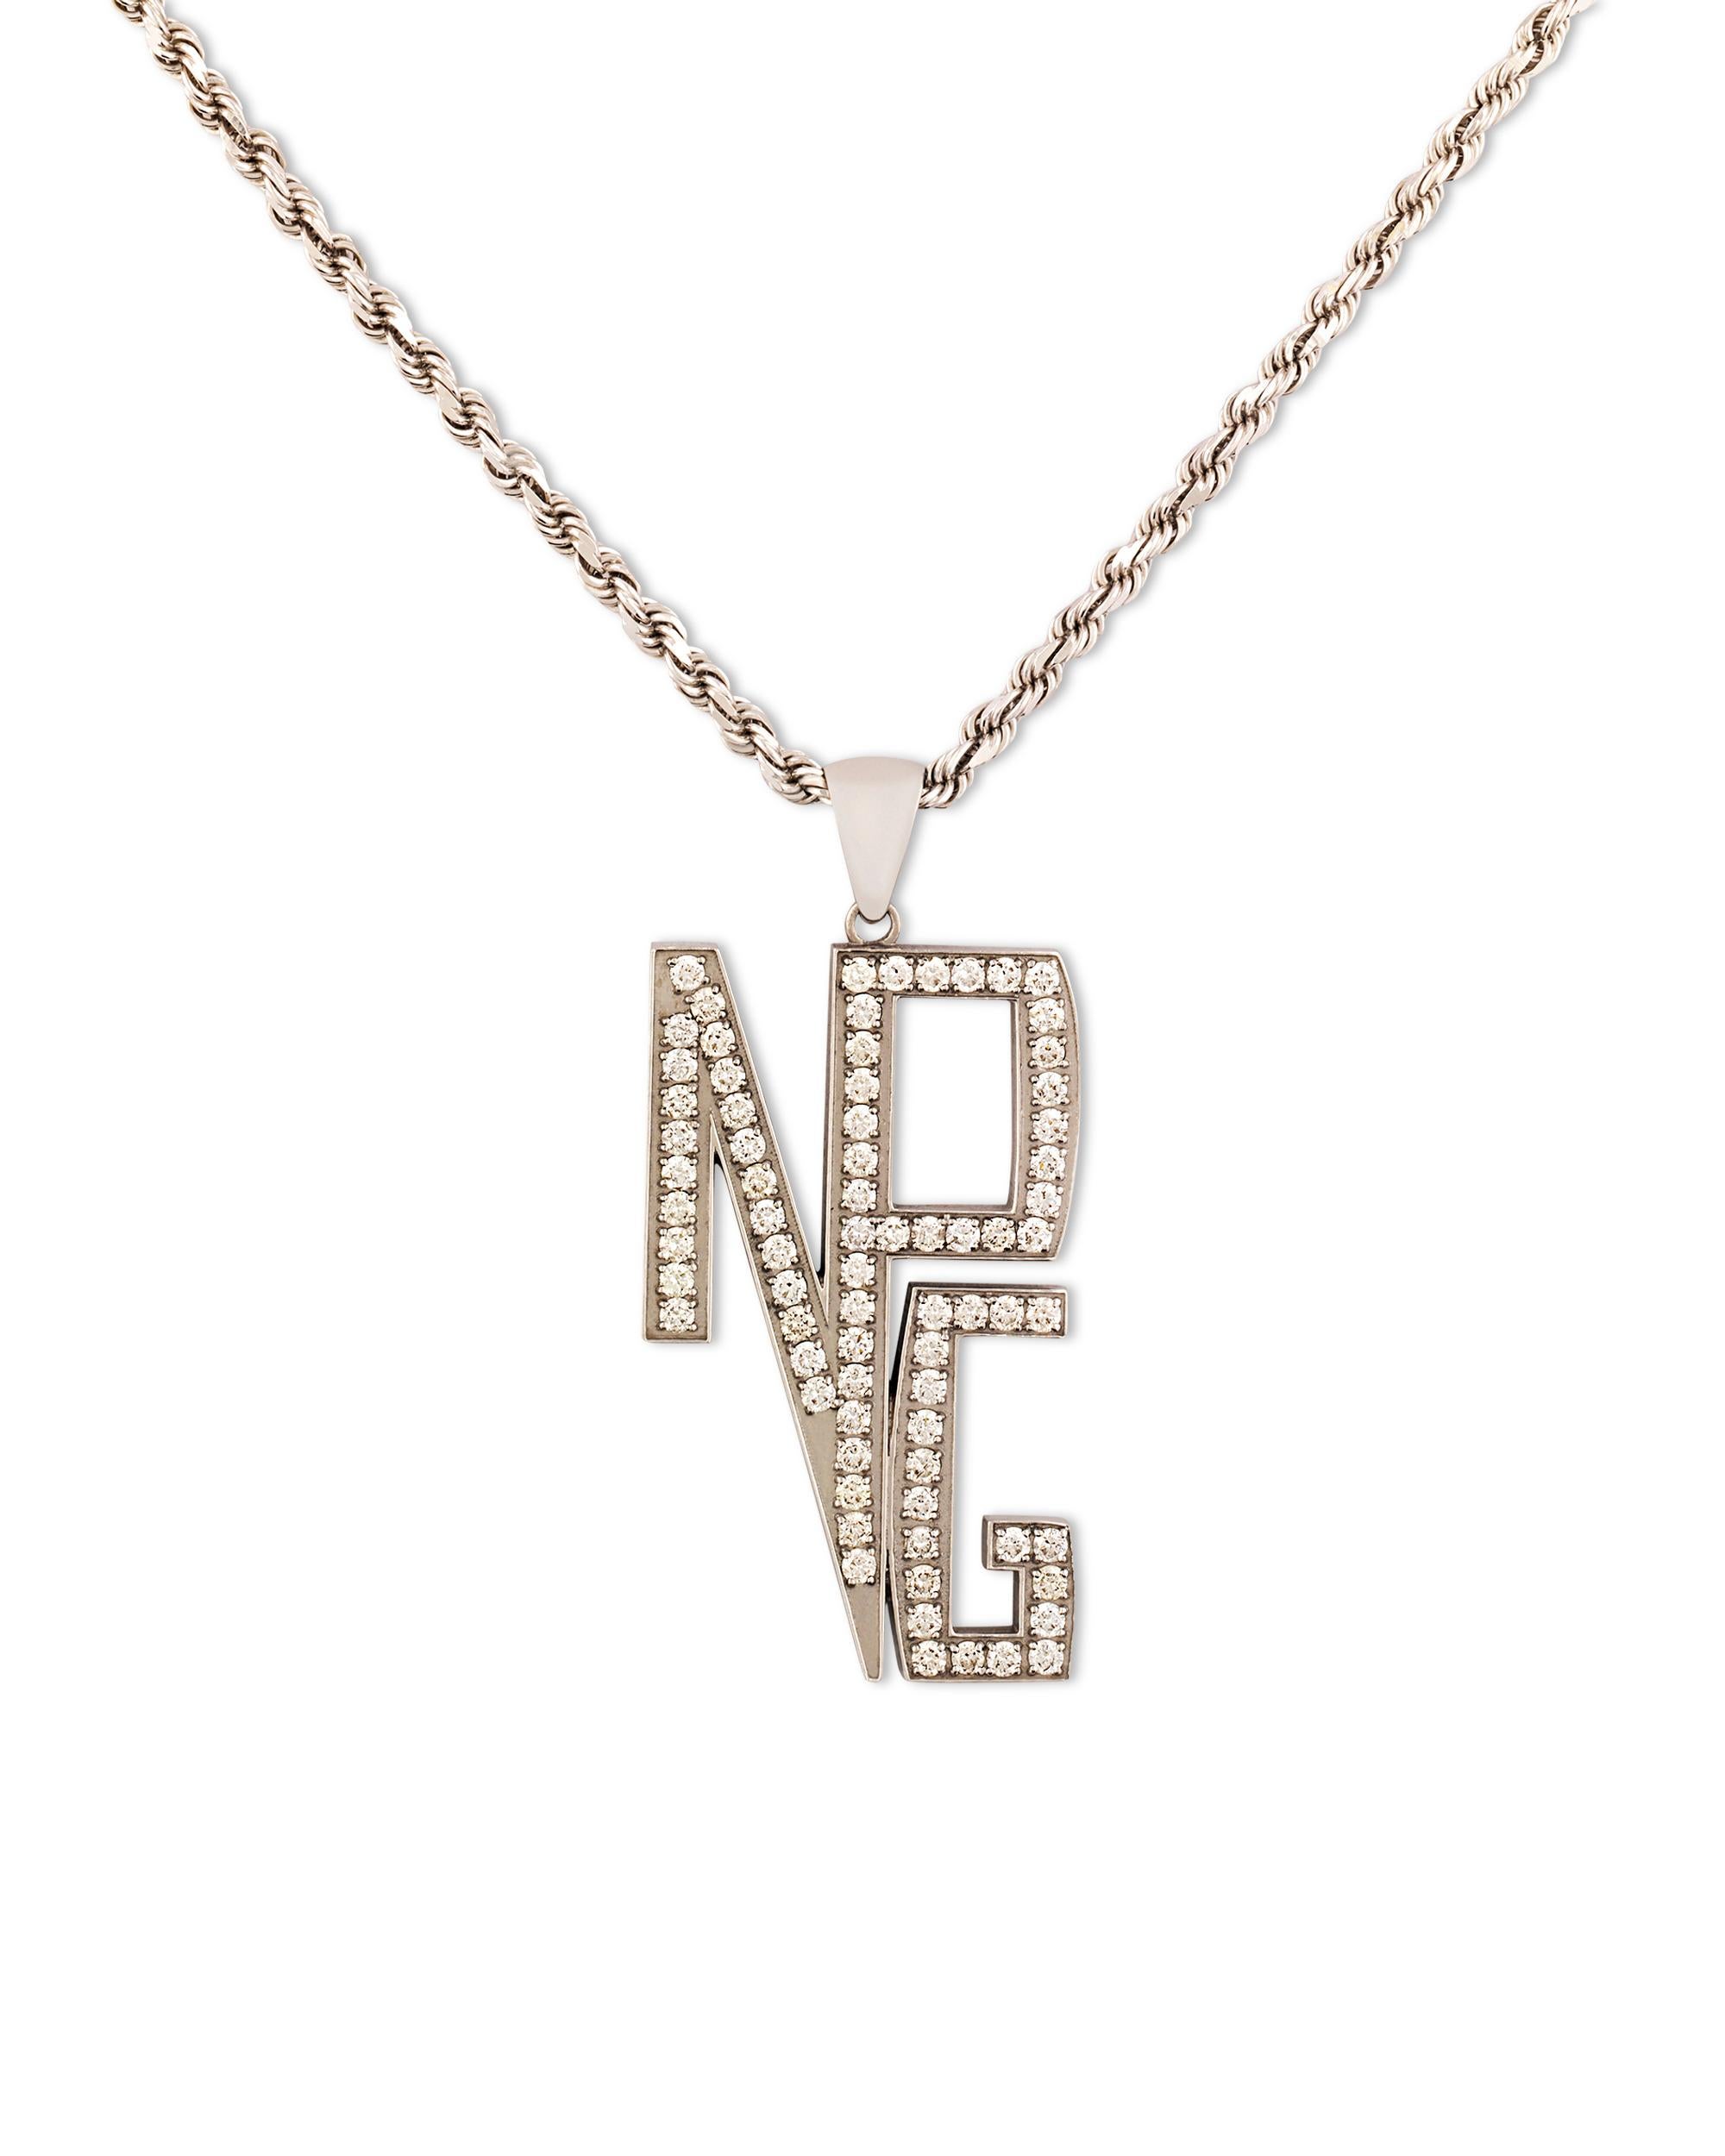 The bold and opulent style of musical icon Prince is on full display in this one-of-a-kind white gold necklace. The letters 